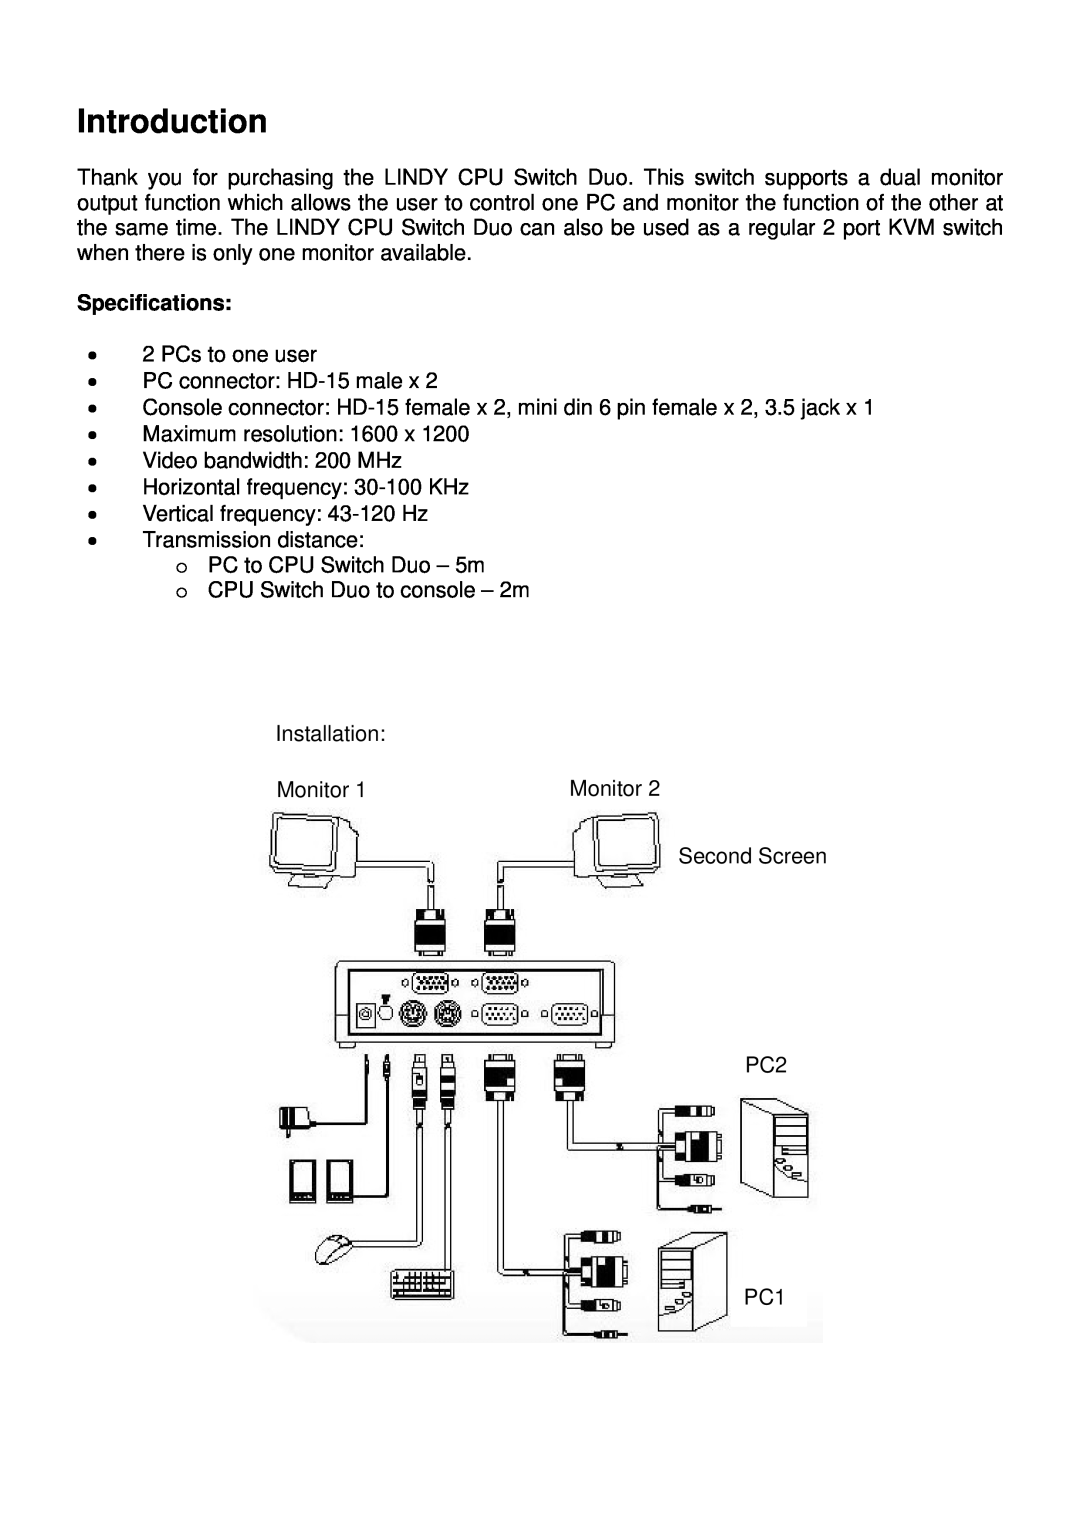 Lindy CPU Switch Duo manual Specifications, Introduction 